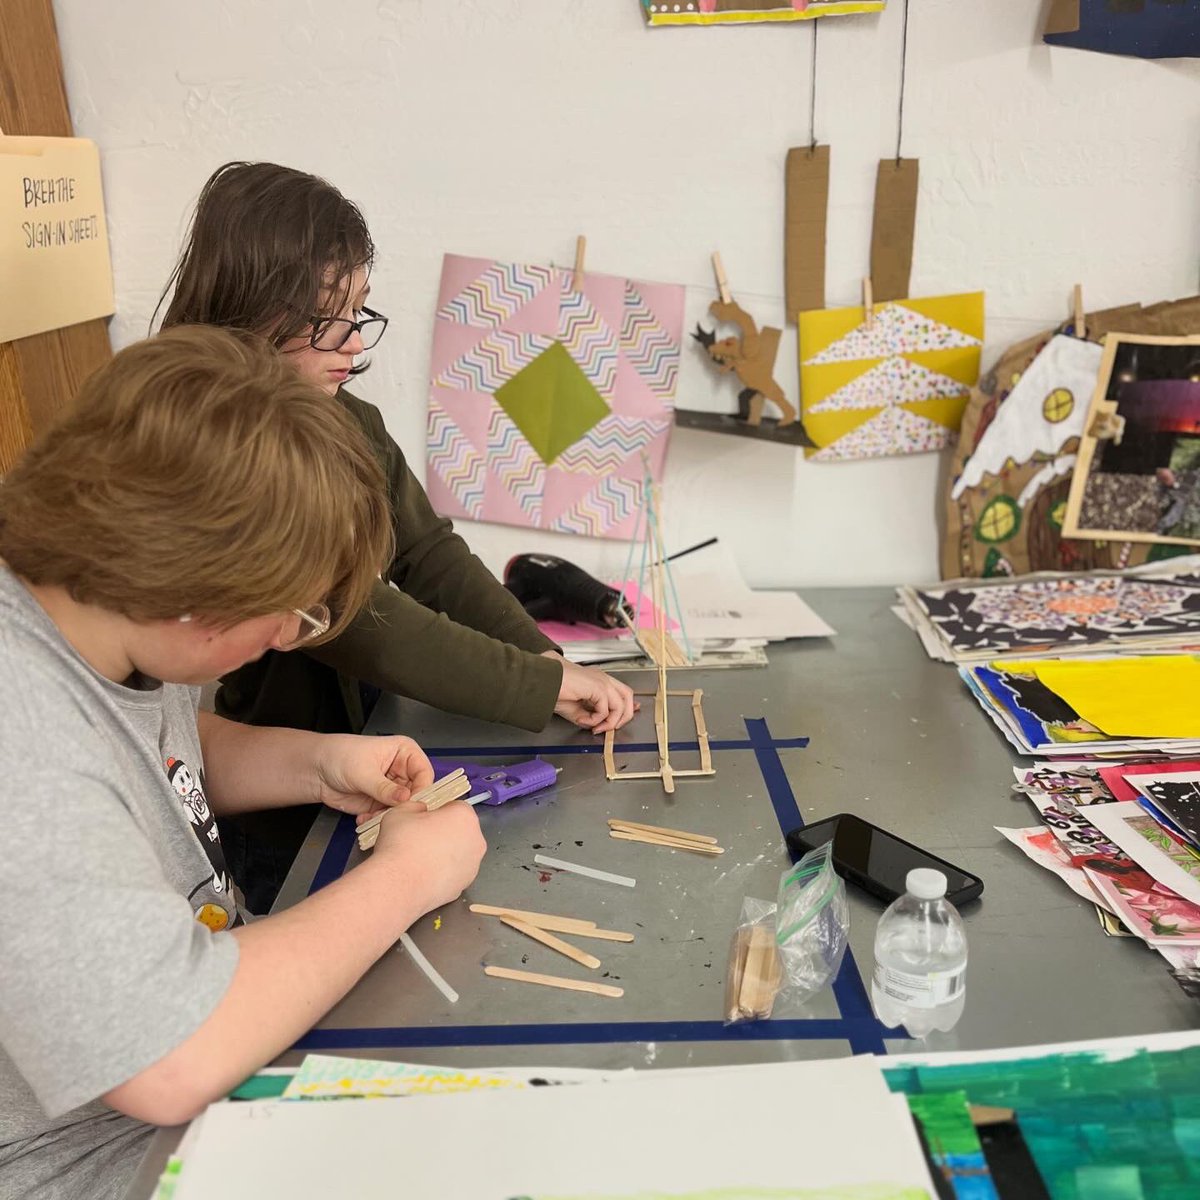 Unlocking creativity one popsicle stick at a time! ✨ Join our Breathe Youth Arts classes for a journey through art, innovation, and imagination!

#lightofchance #breatheyoutharts #youtharts #music #dance #visualarts #culinary #creativewriting #madisonvilleky #bowlinggreenky